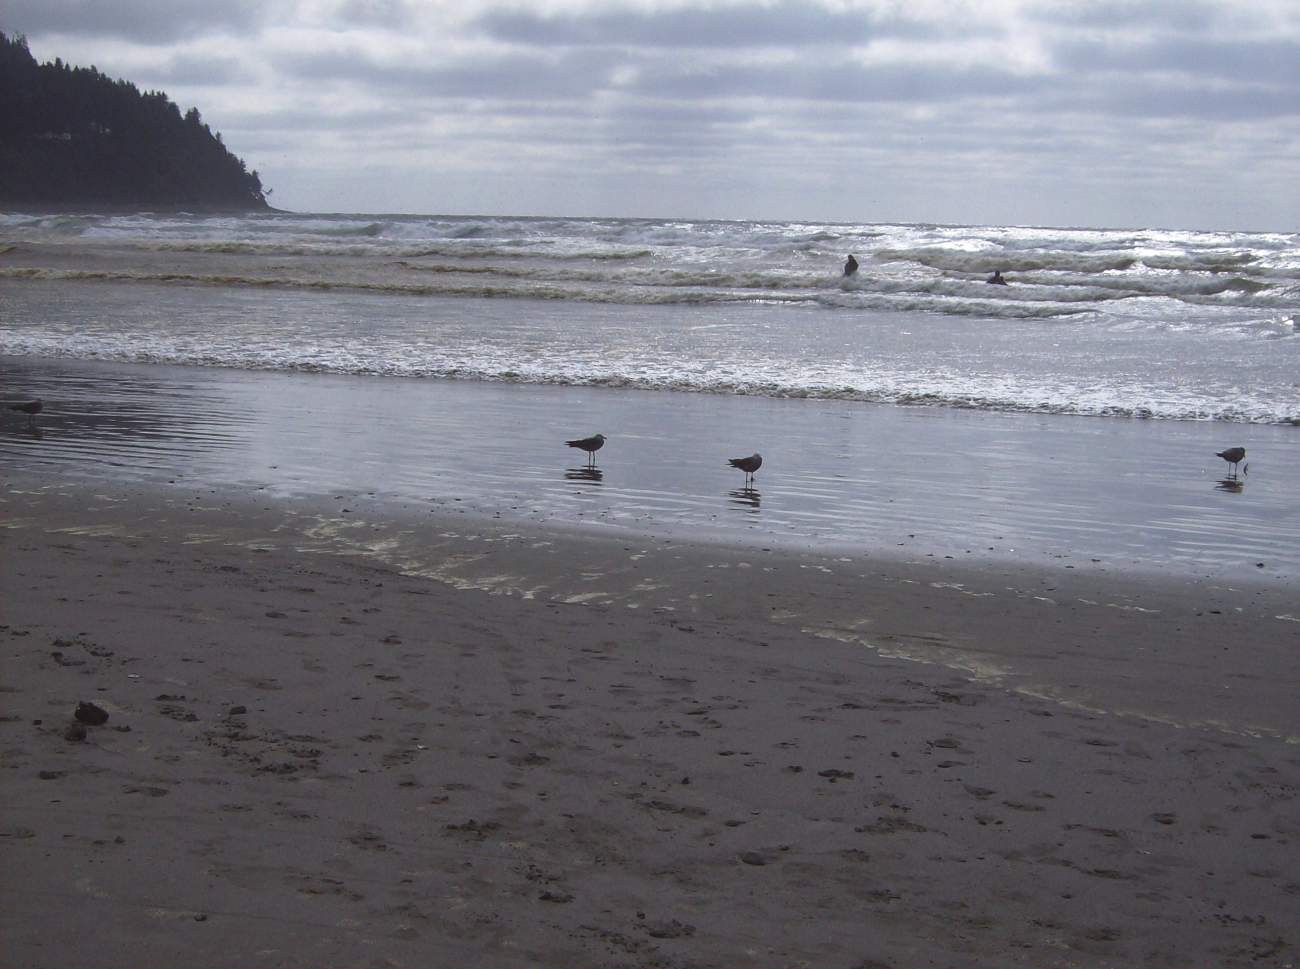 Seagulls, surf, and impervious to cold water humans on a northern Oregon beach